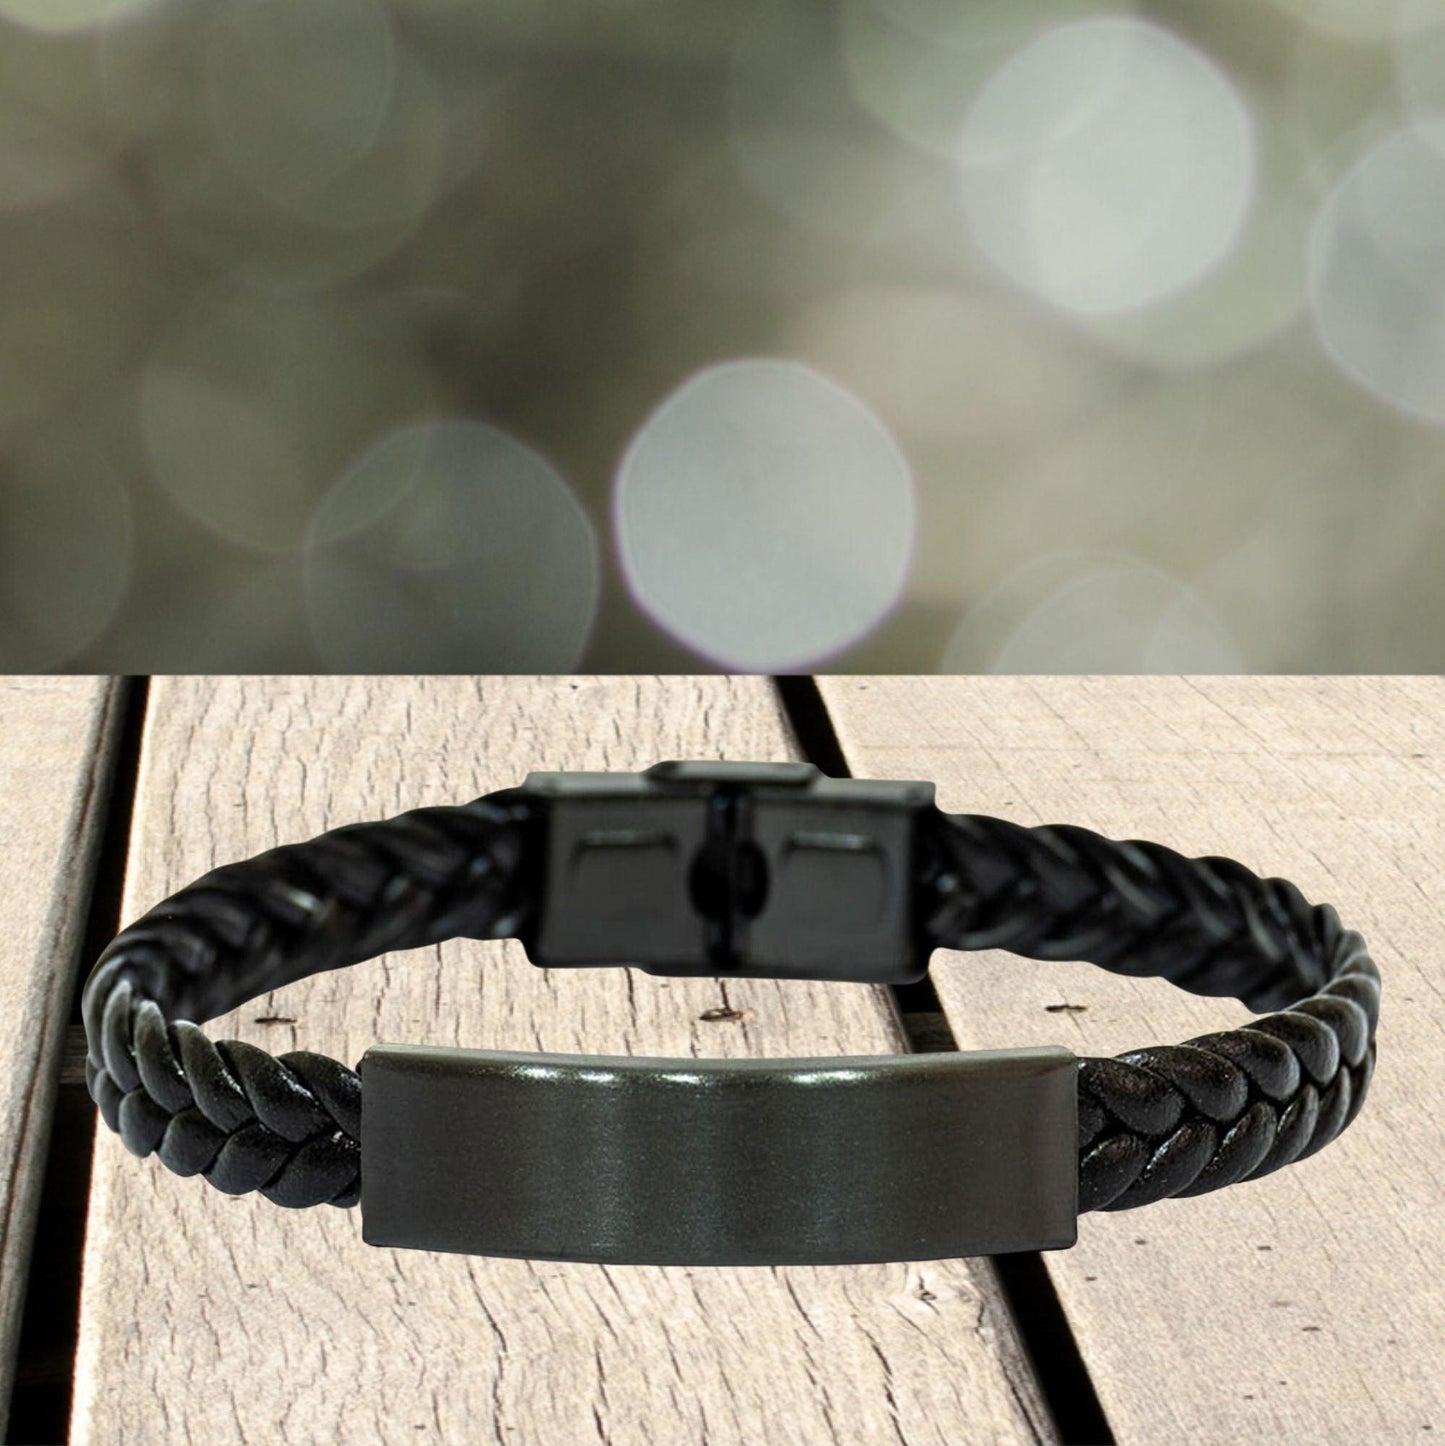 Stepbrother Gifts, To My Stepbrother Remember, you will never lose. You will either WIN or LEARN, Keepsake Braided Leather Bracelet For Stepbrother Engraved, Birthday Christmas Gifts Ideas For Stepbrother X-mas Gifts